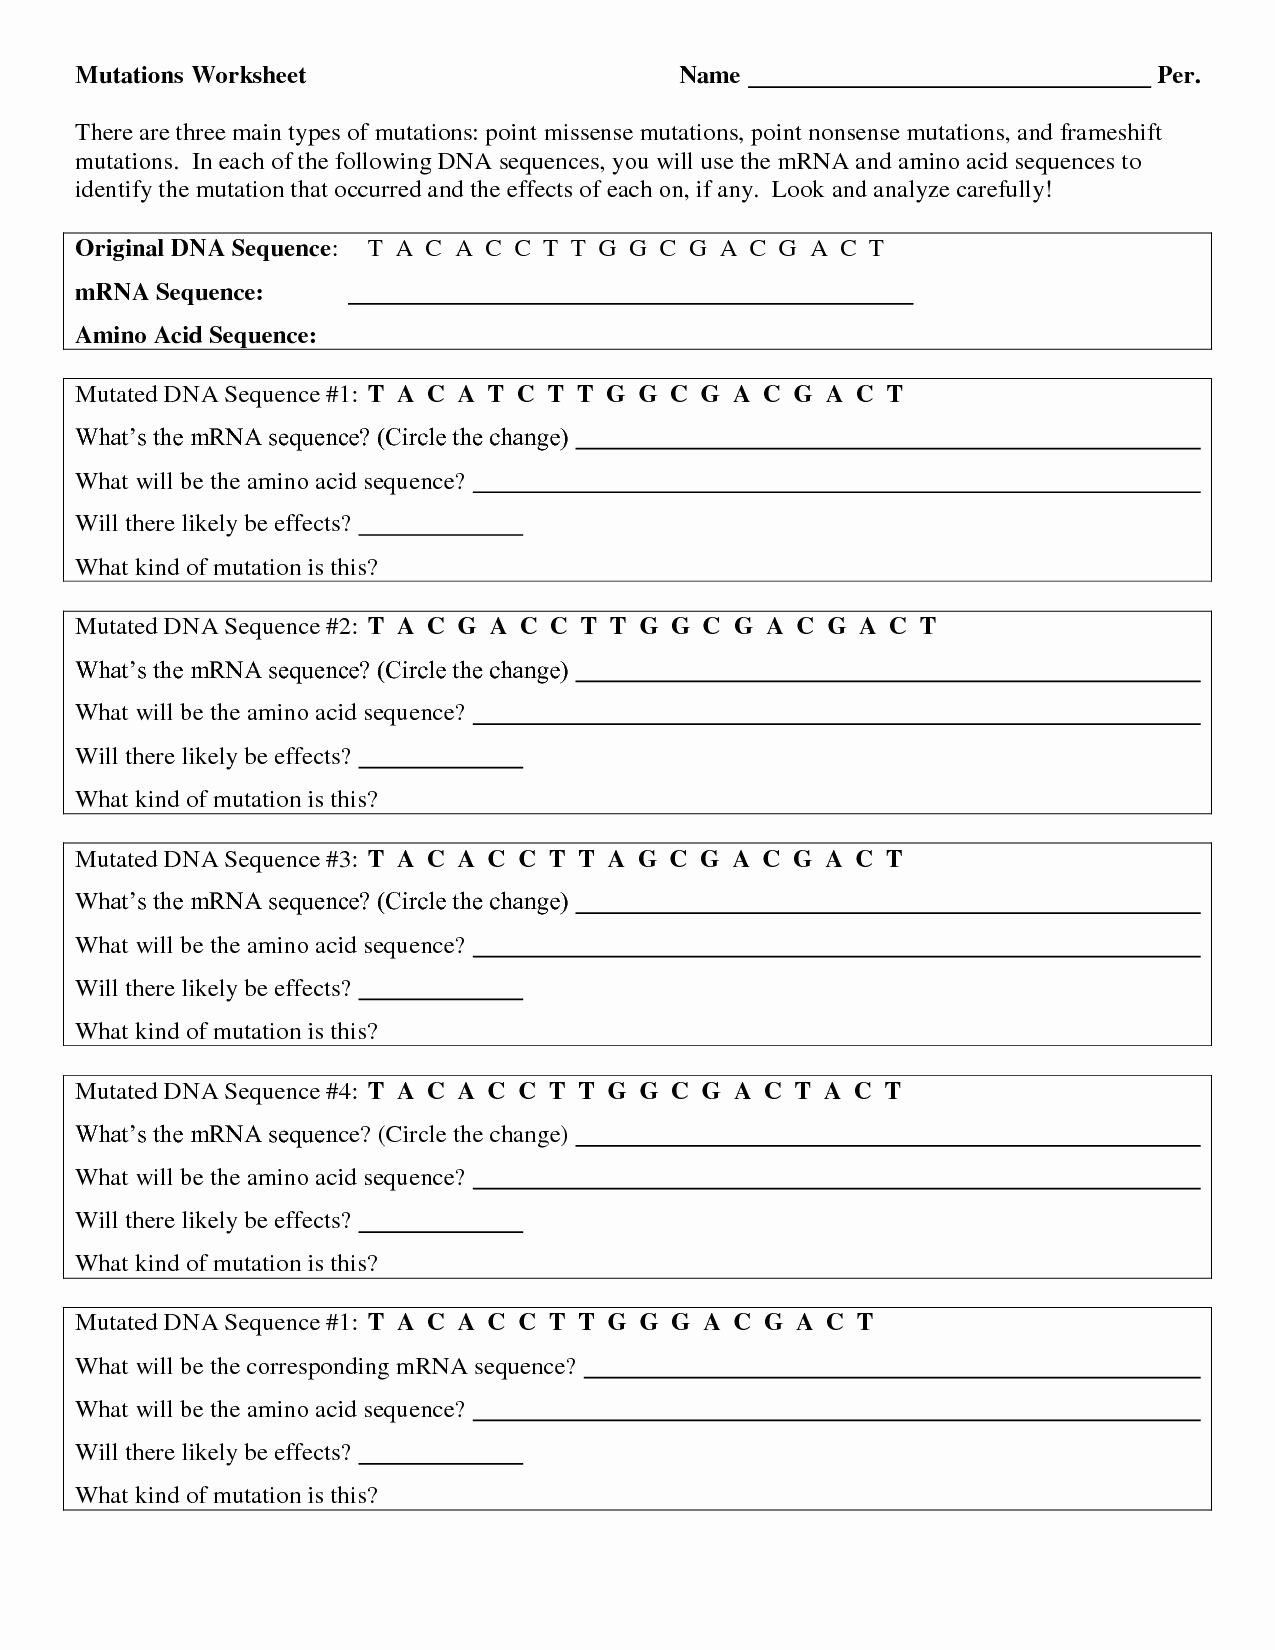 Mutations Worksheet Answer Key Best Of 19 Best Of the Genetic Code Worksheet Answers